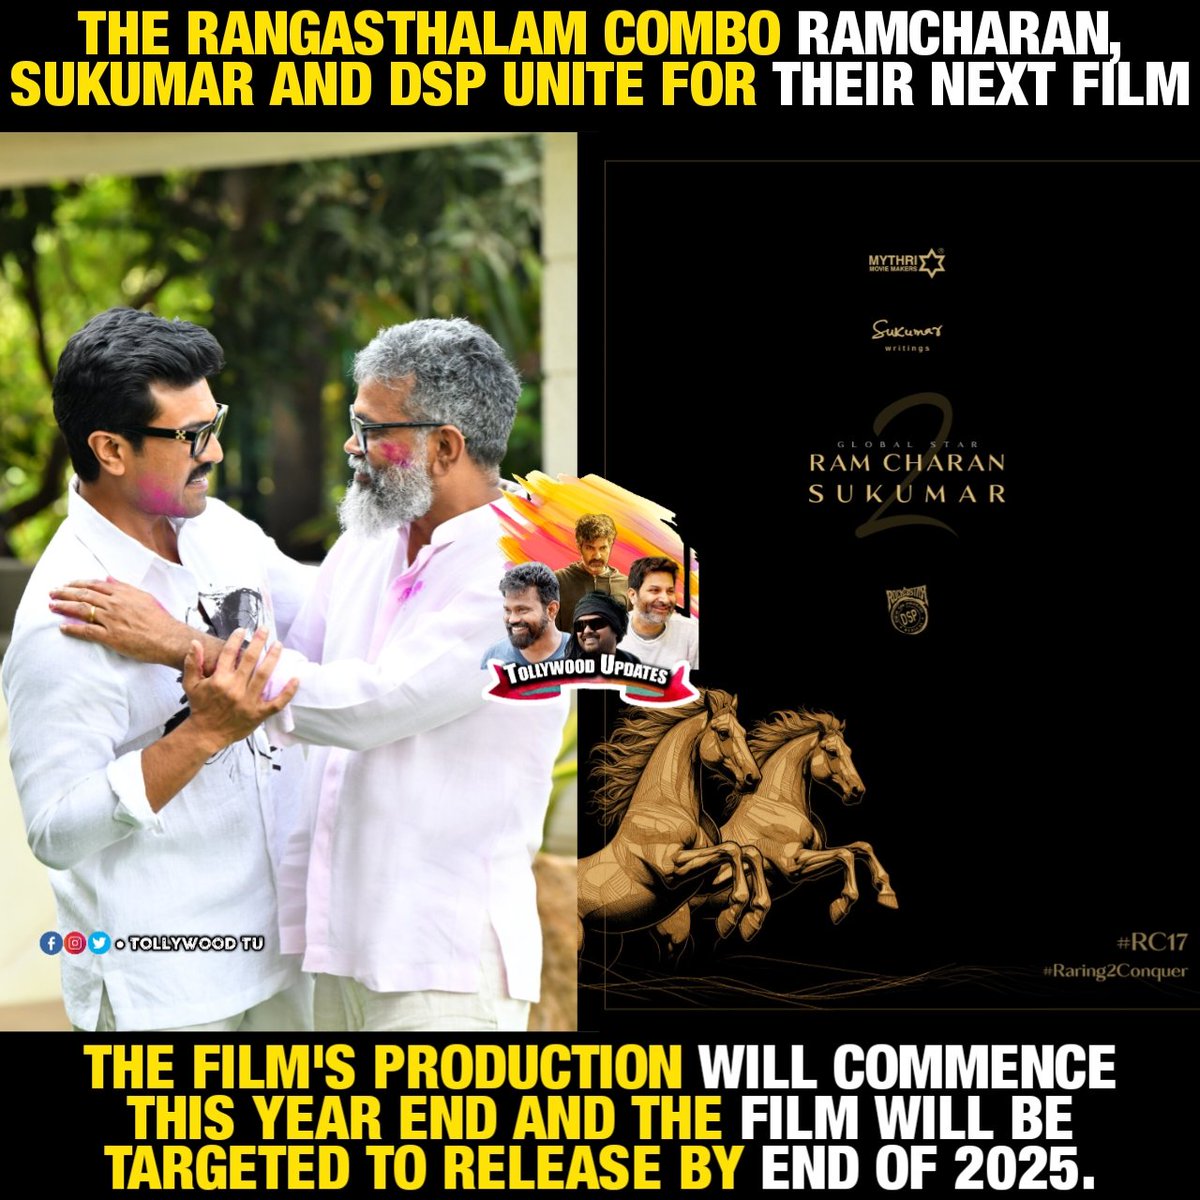 The Hero introduction sequence of this film was already shot long back. Can't wait for this hard hitting intro sequence !! #RC17 #Ramcharan #Sukumar #DeviSriPrasad #MythriMovieMakers